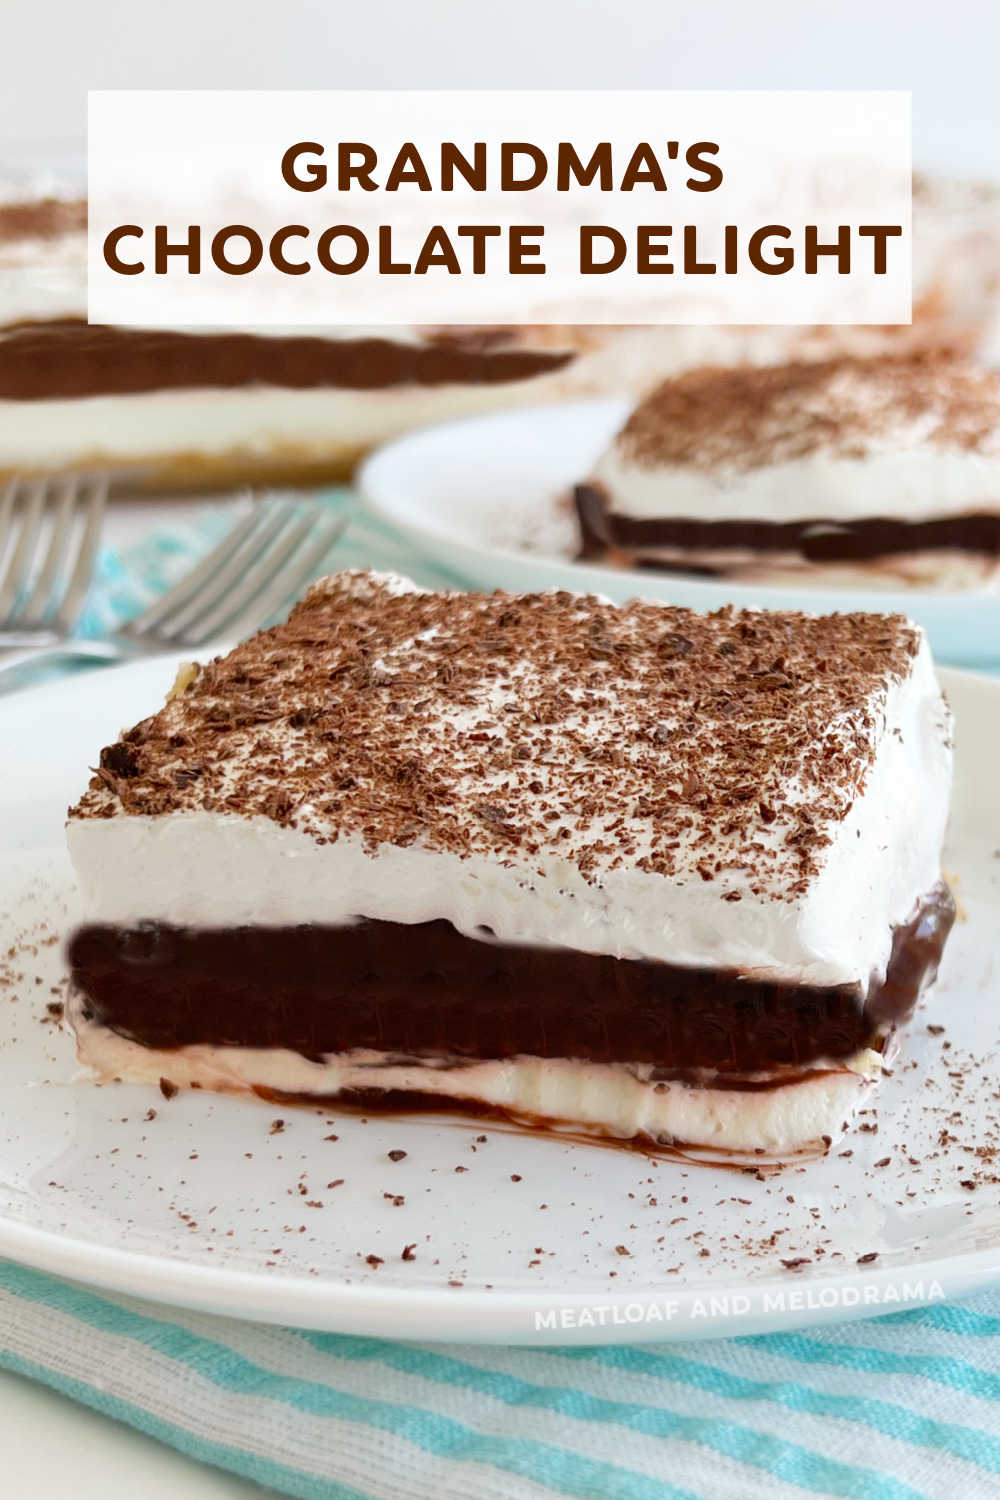 Grandma's Chocolate Delight Recipe is a simple layered dessert with pudding, sweetened cream cheese and whipped cream on a shortbread crust. This cool, creamy treat will be one of your favorite desserts for family gatherings, holidays or any day! via @meamel